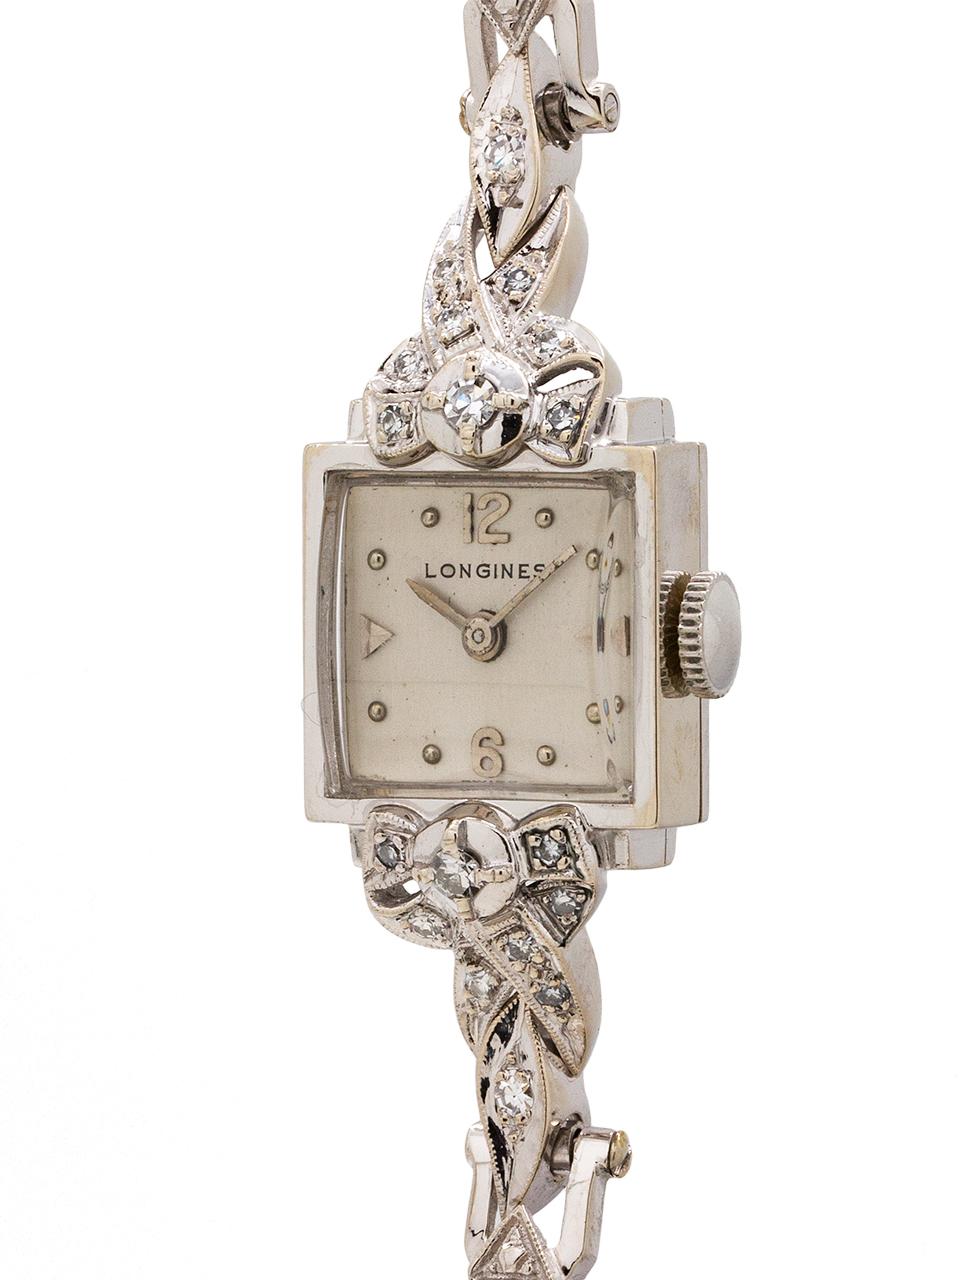 
Lady Longines 14K white gold & diamond set cocktail watch circa 1940’s. Very nice looking vintage diamond set watch with associated 14K white gold diamond set bracelet. Featuring silvered satin dial, dome crystal, and rectangular case surrounded by